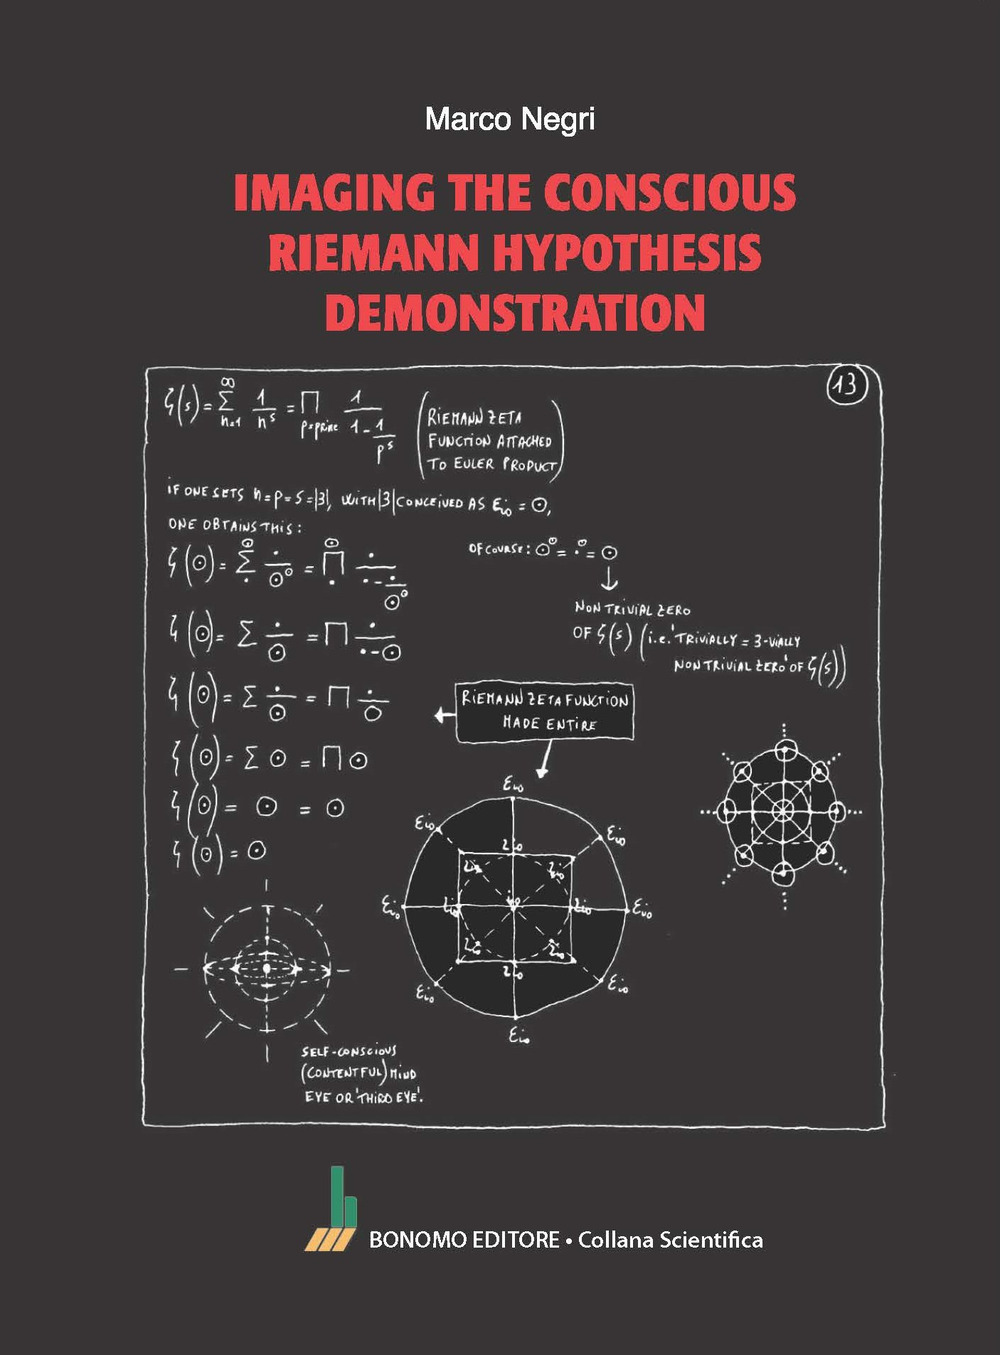 Imaging the conscious Riemann hypothesis demonstration